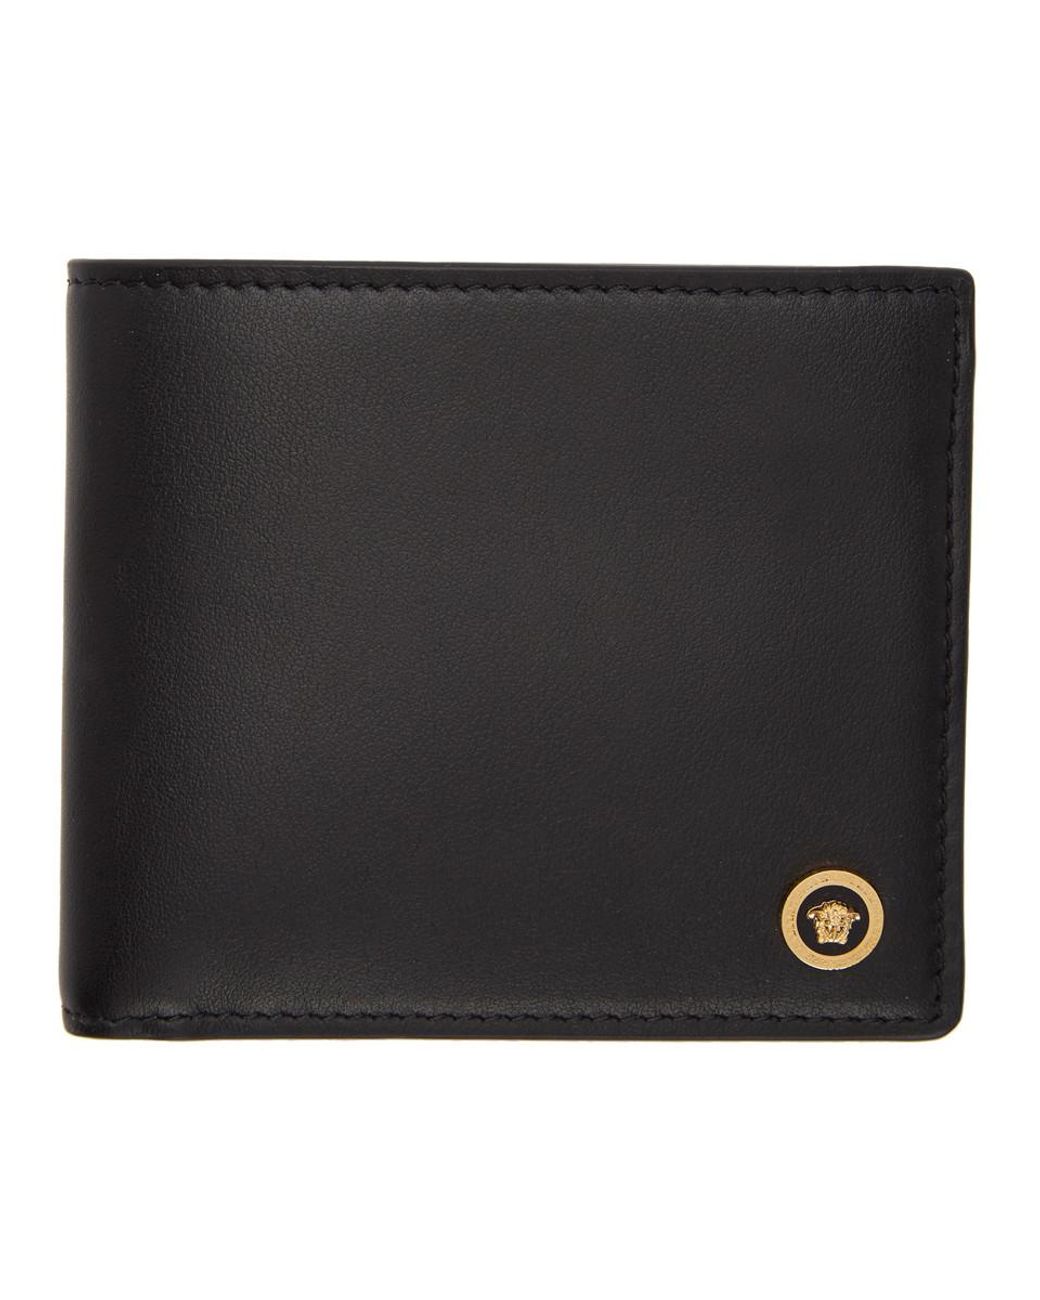 Versace Leather Black Icon Bifold Wallet for Men - Lyst